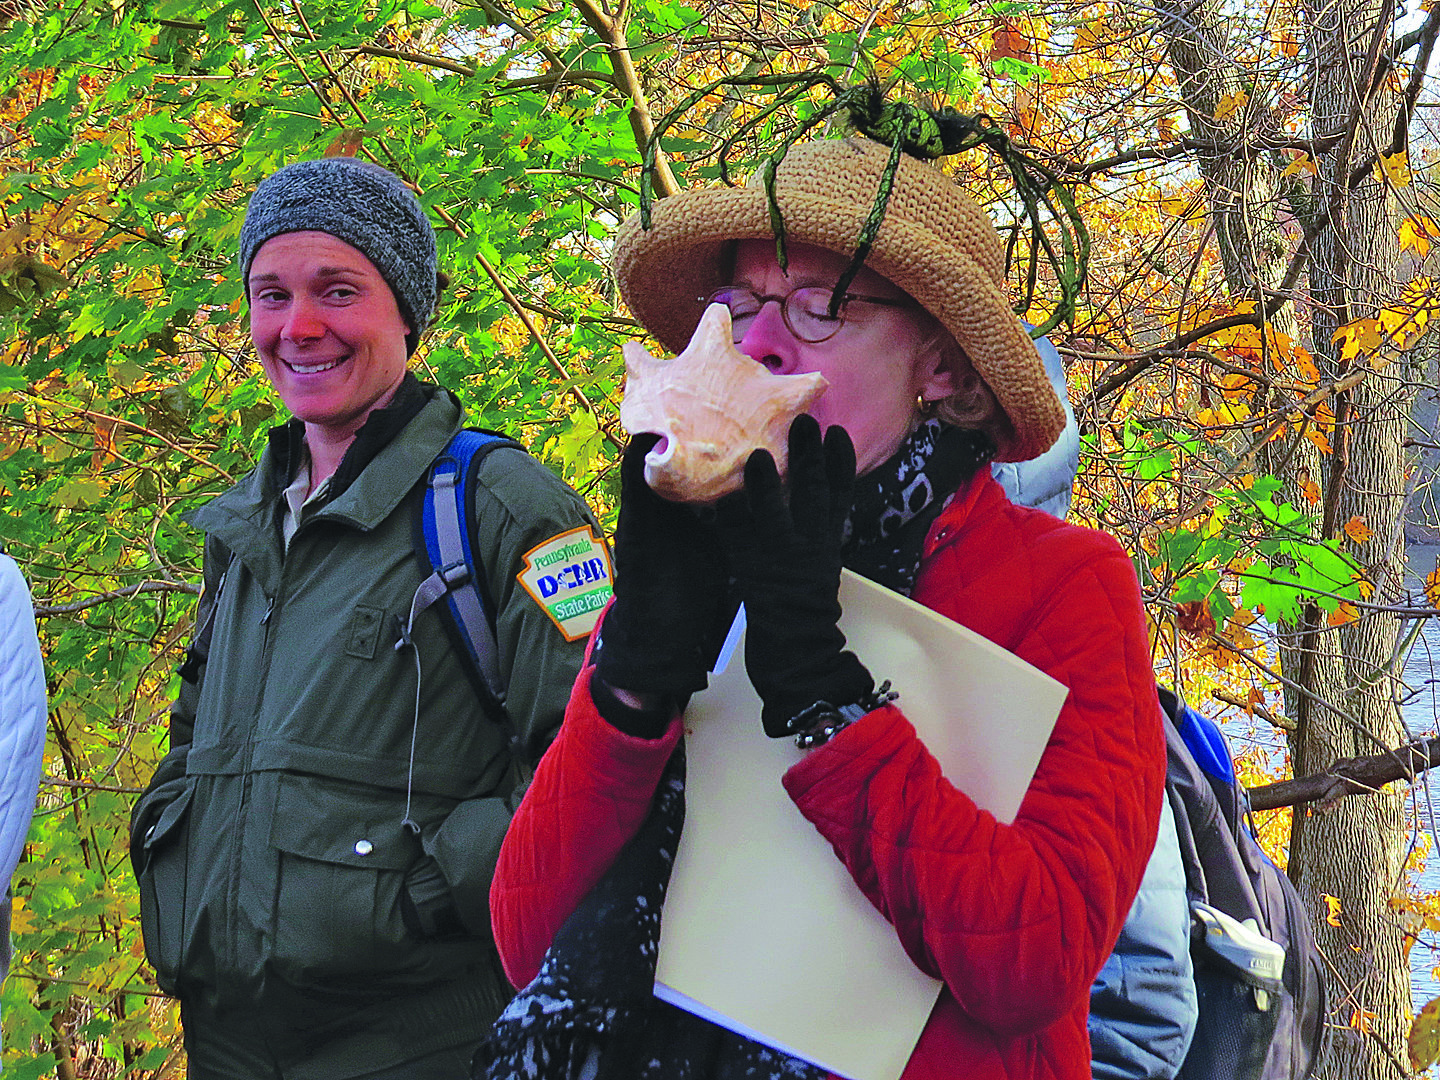 Carole Mebus photographed Susan Taylor on October 31, 2015. Susan always “blew” the conch shell at the beginning of an October Canal Walk, this one on Halloween. The second person in the photo is Katie Martens, Delaware Canal State Park Educator.